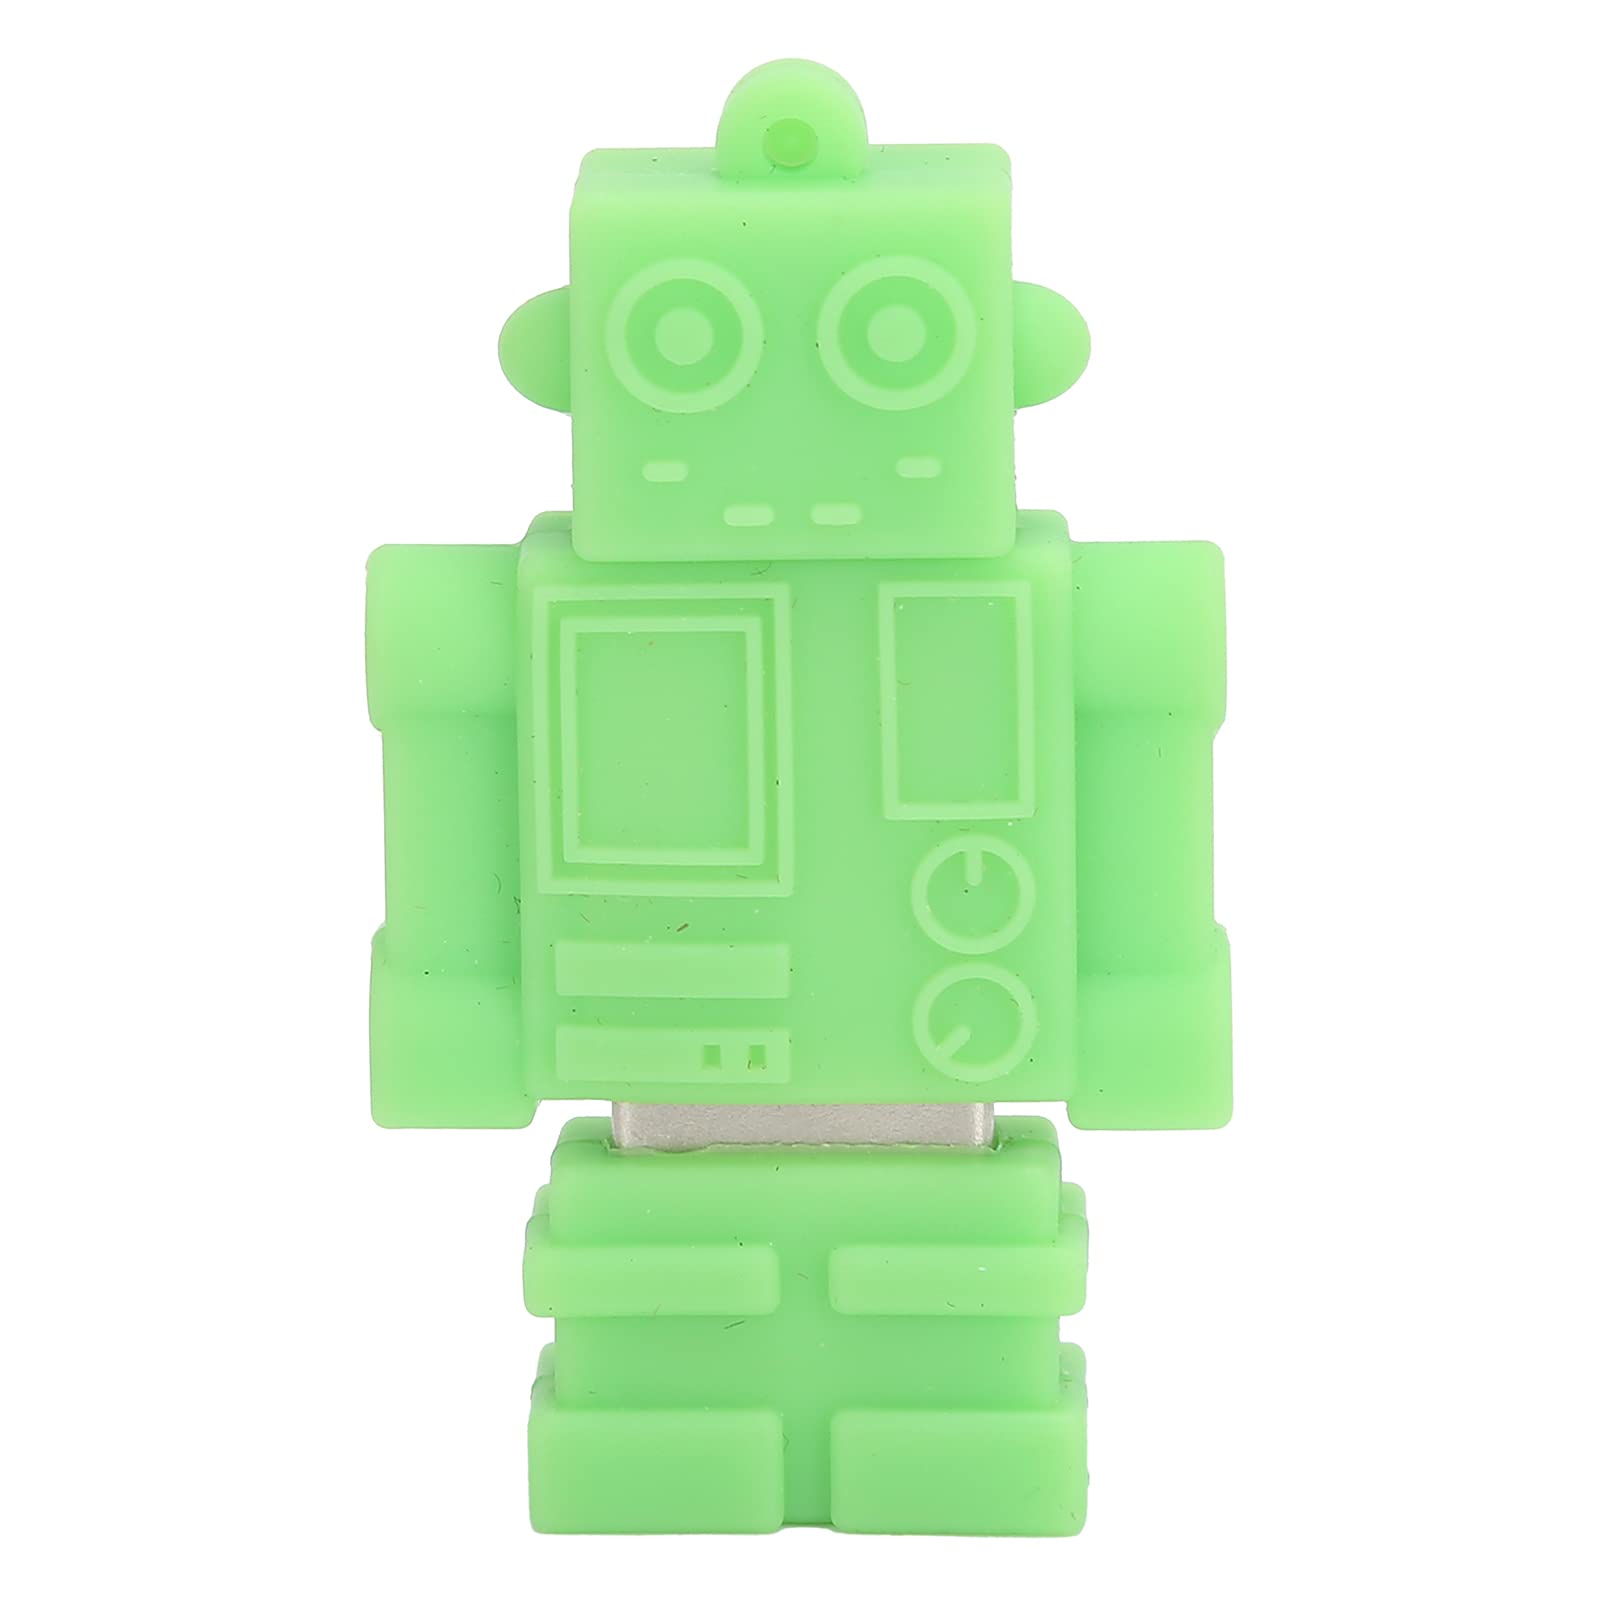 GOWENIC Novelty USB Flash Drive Cute Cartoon Green Robot USB Disk Portable Thumb Drive Memory Stick for Data Storage Transmission Sharing, Great Friends or Family (128GB)